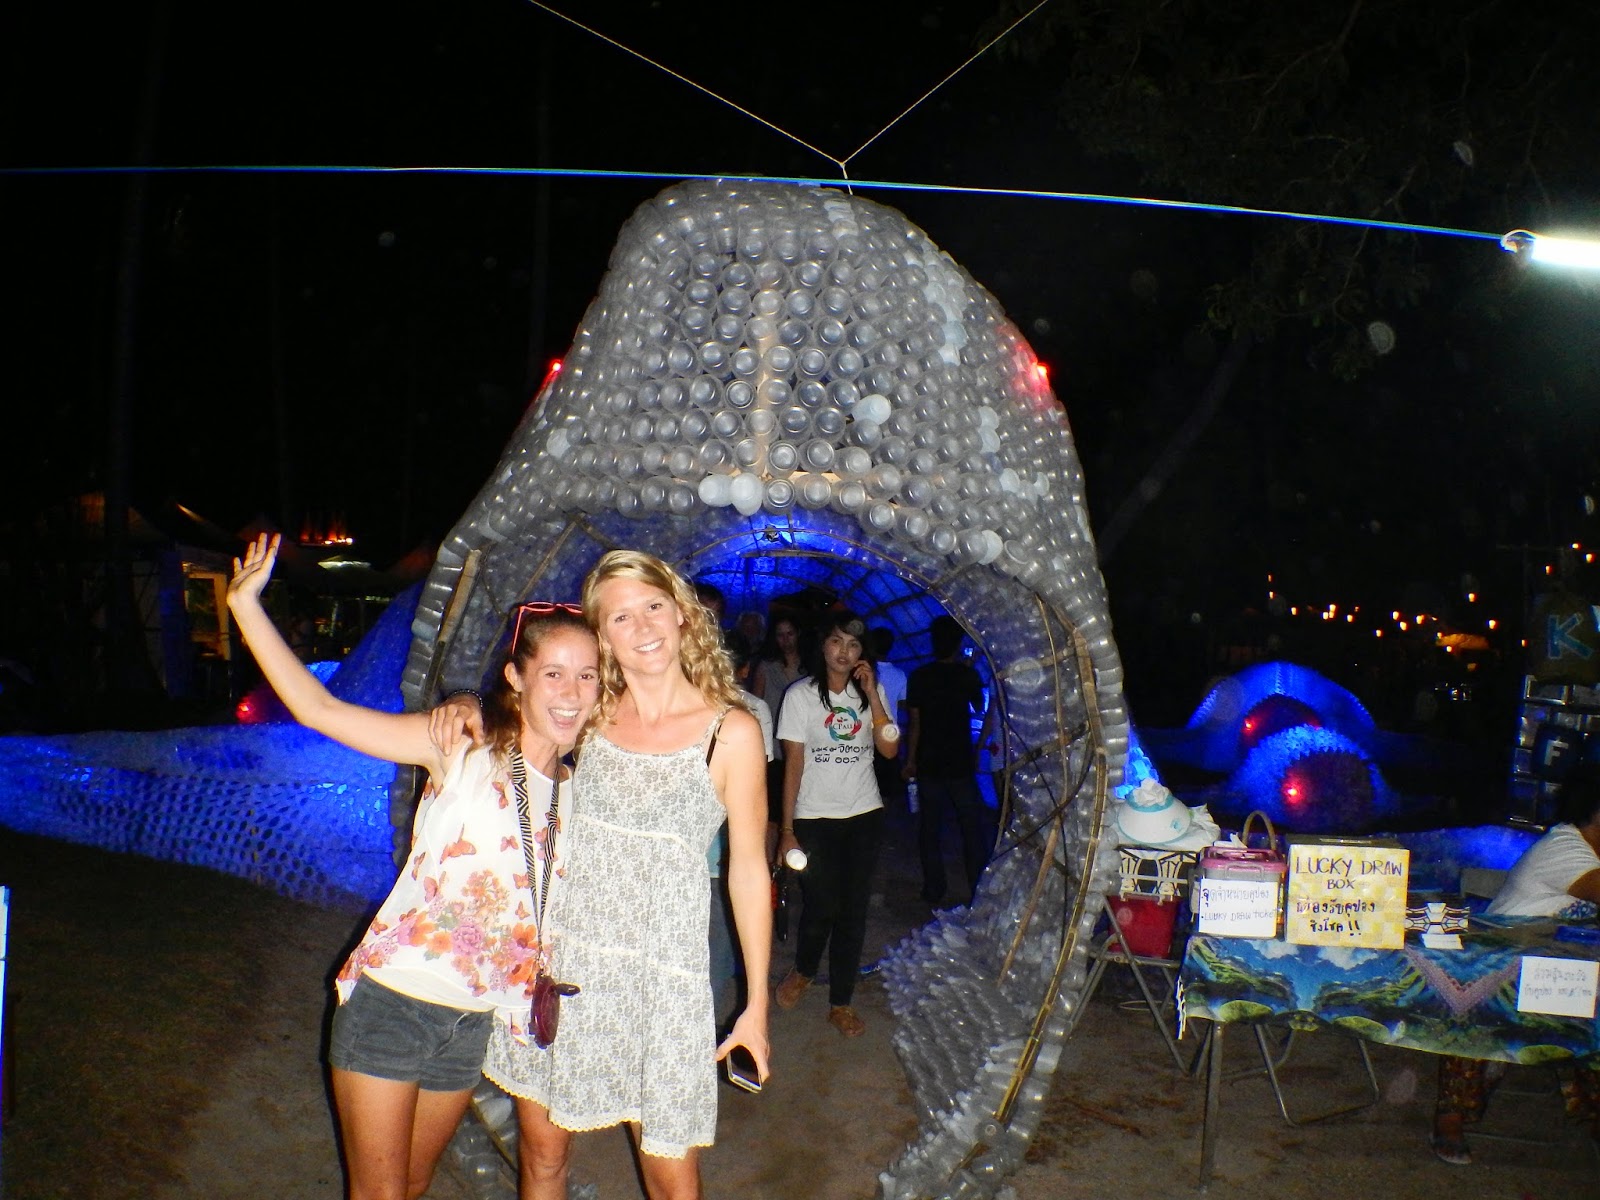 Me and Maike standing in front of a whale made out of re-purposed water bottles at the Koh Tao Festival